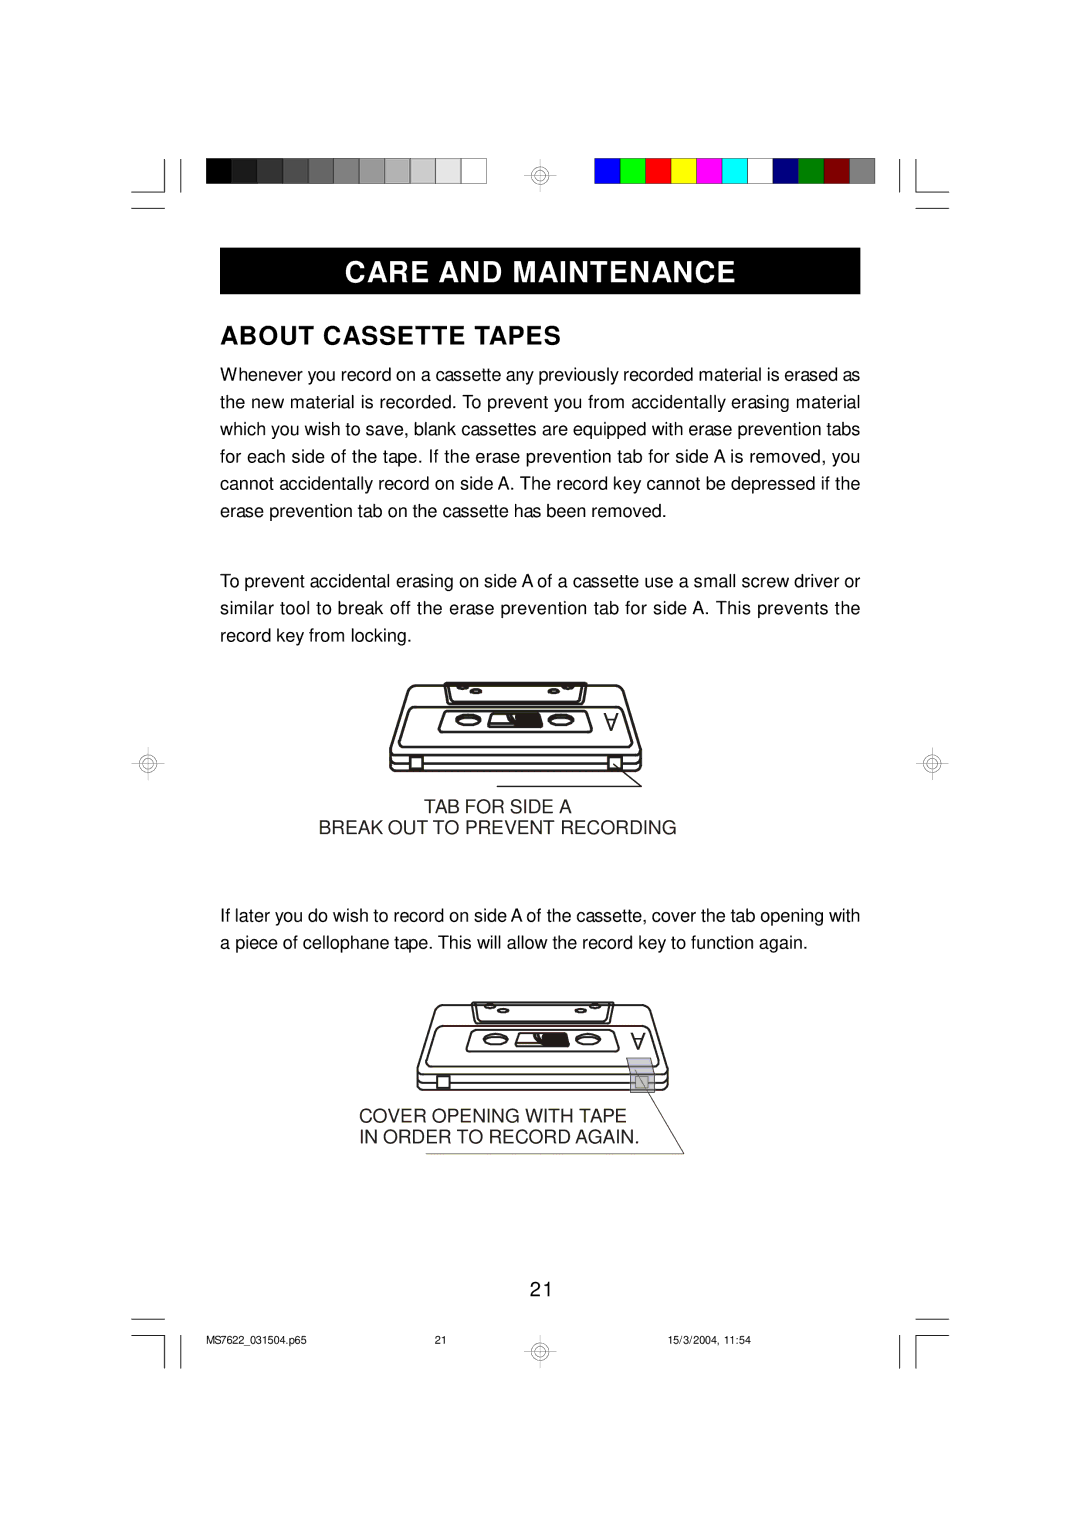 Emerson MS7622 owner manual Care and Maintenance, About Cassette Tapes 